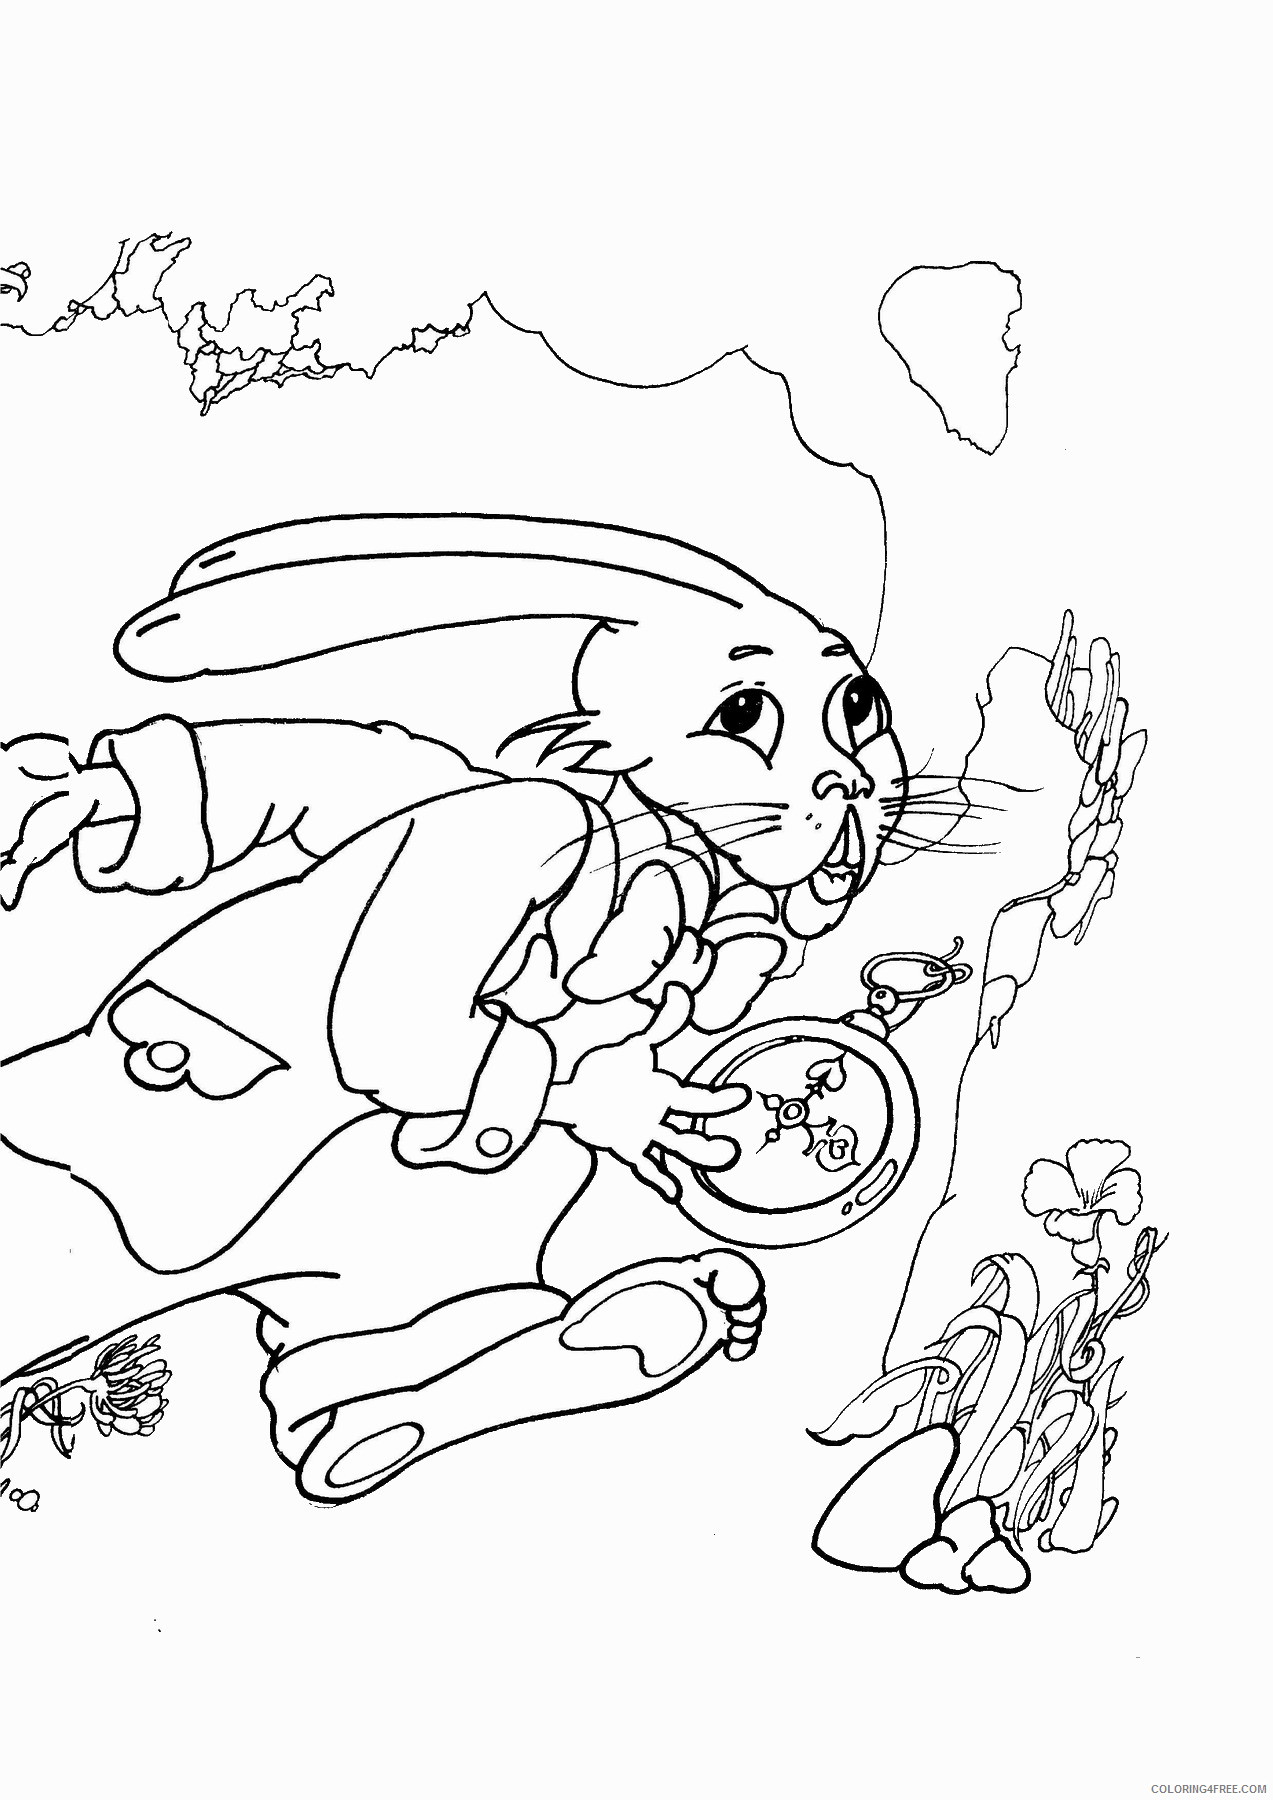 Alice in Wonderland Coloring Pages Cartoons alice_78 Printable 2020 0369 Coloring4free